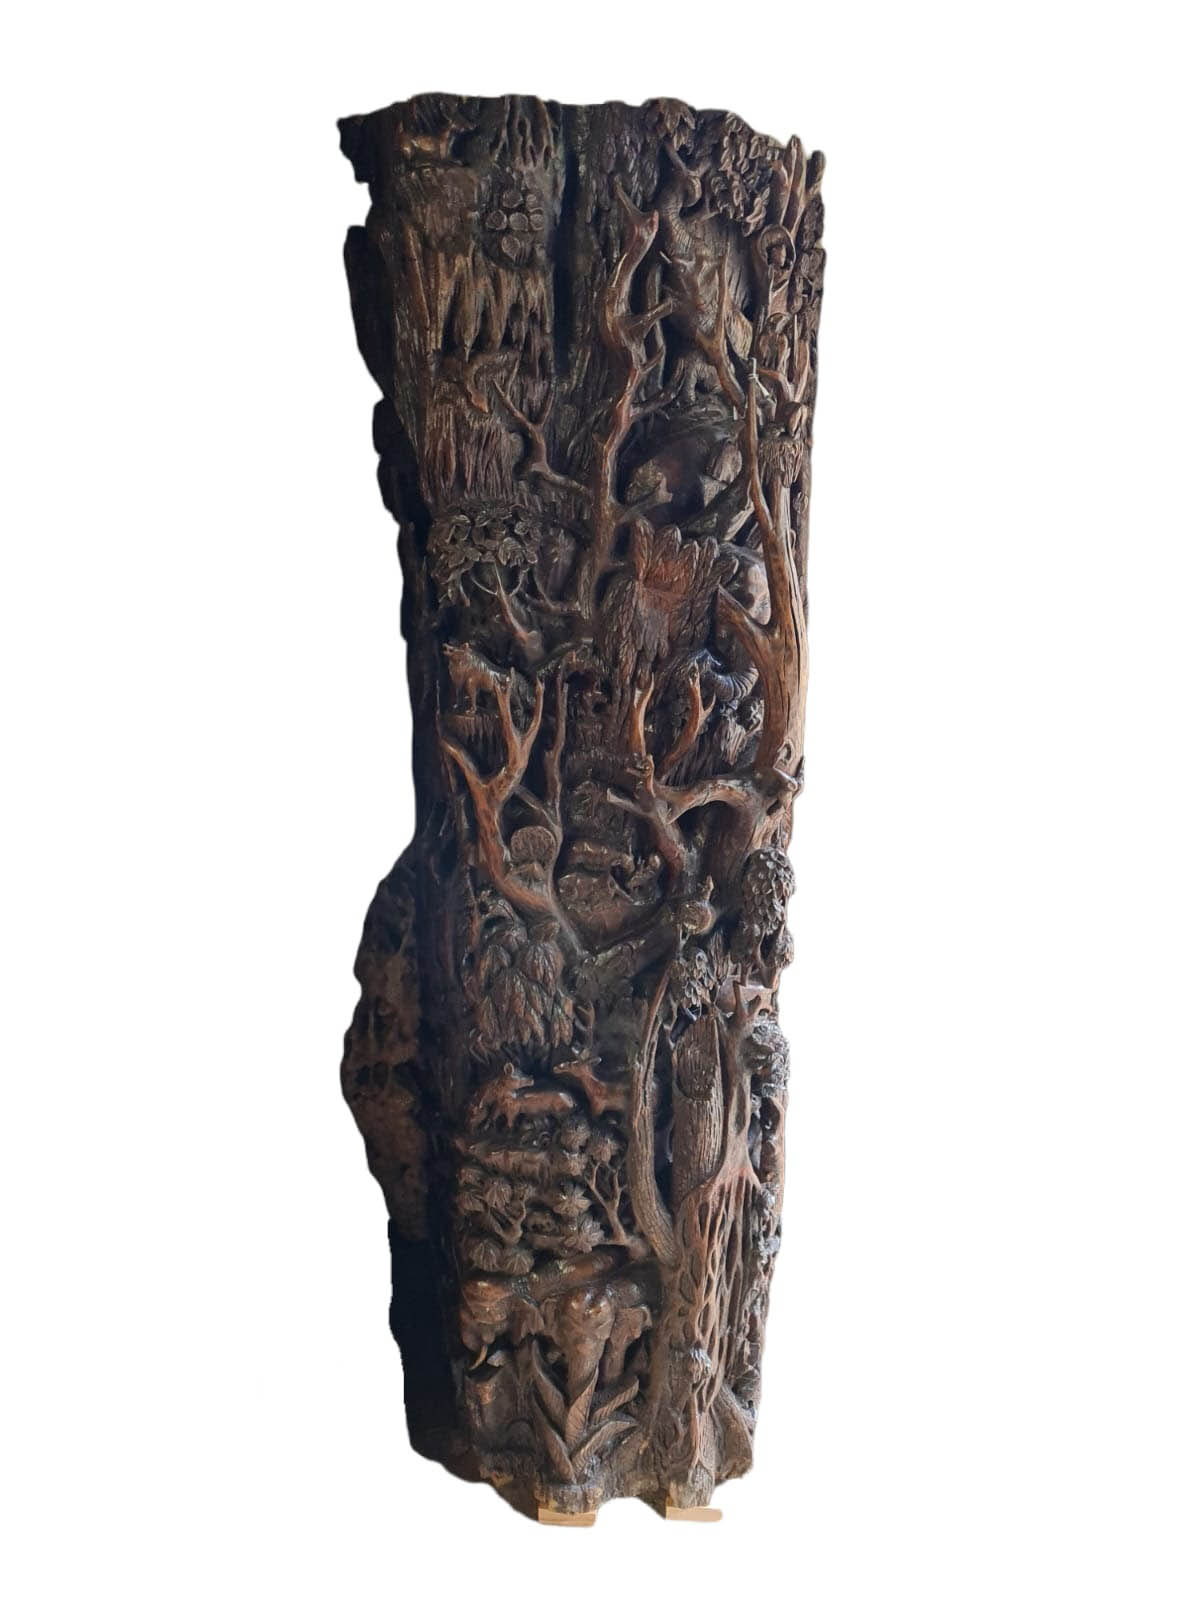 A LARGE AND IMPRESSIVE HEAVILY AND FINELY CARVED BURMESE TEAK TREE TRUNK with flora and fauna,